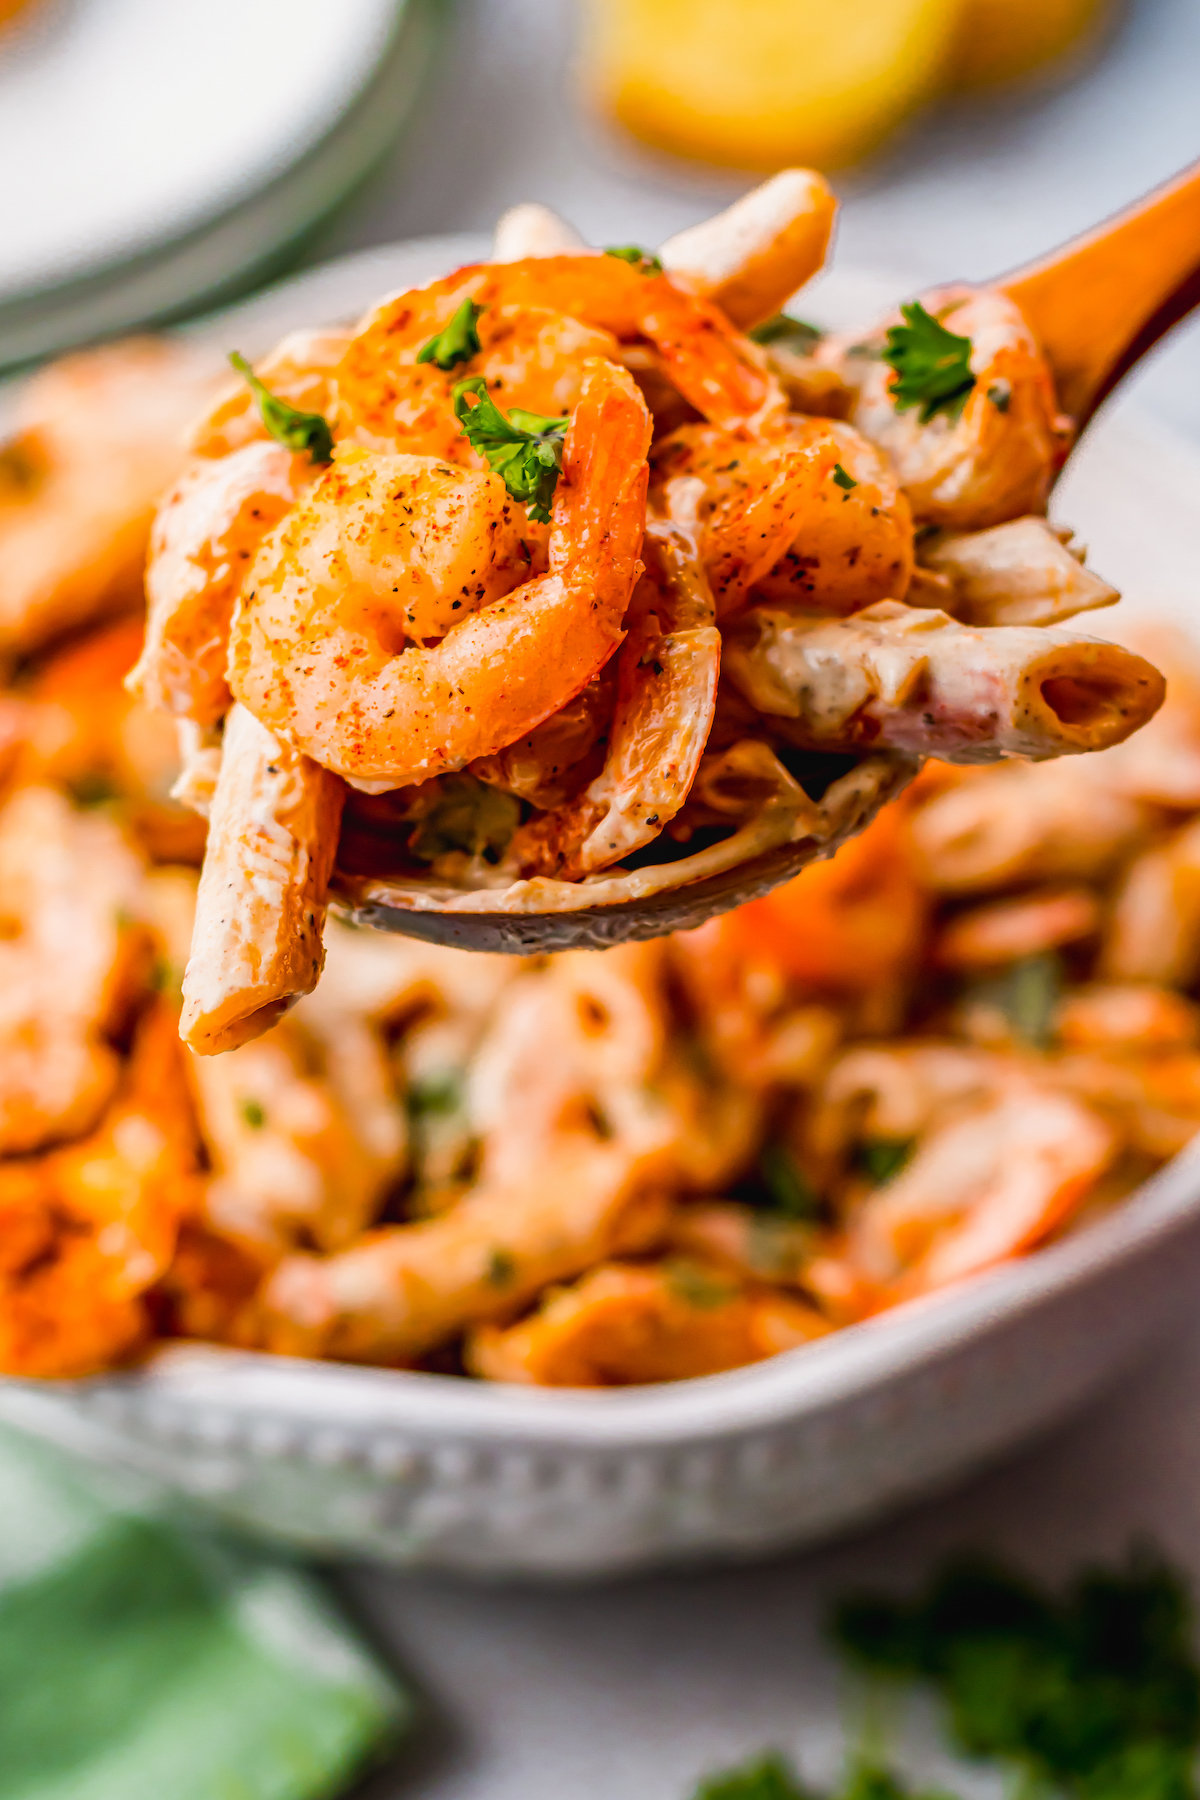 Lifting shrimp and pasta toward the camera with a wooden spoon.